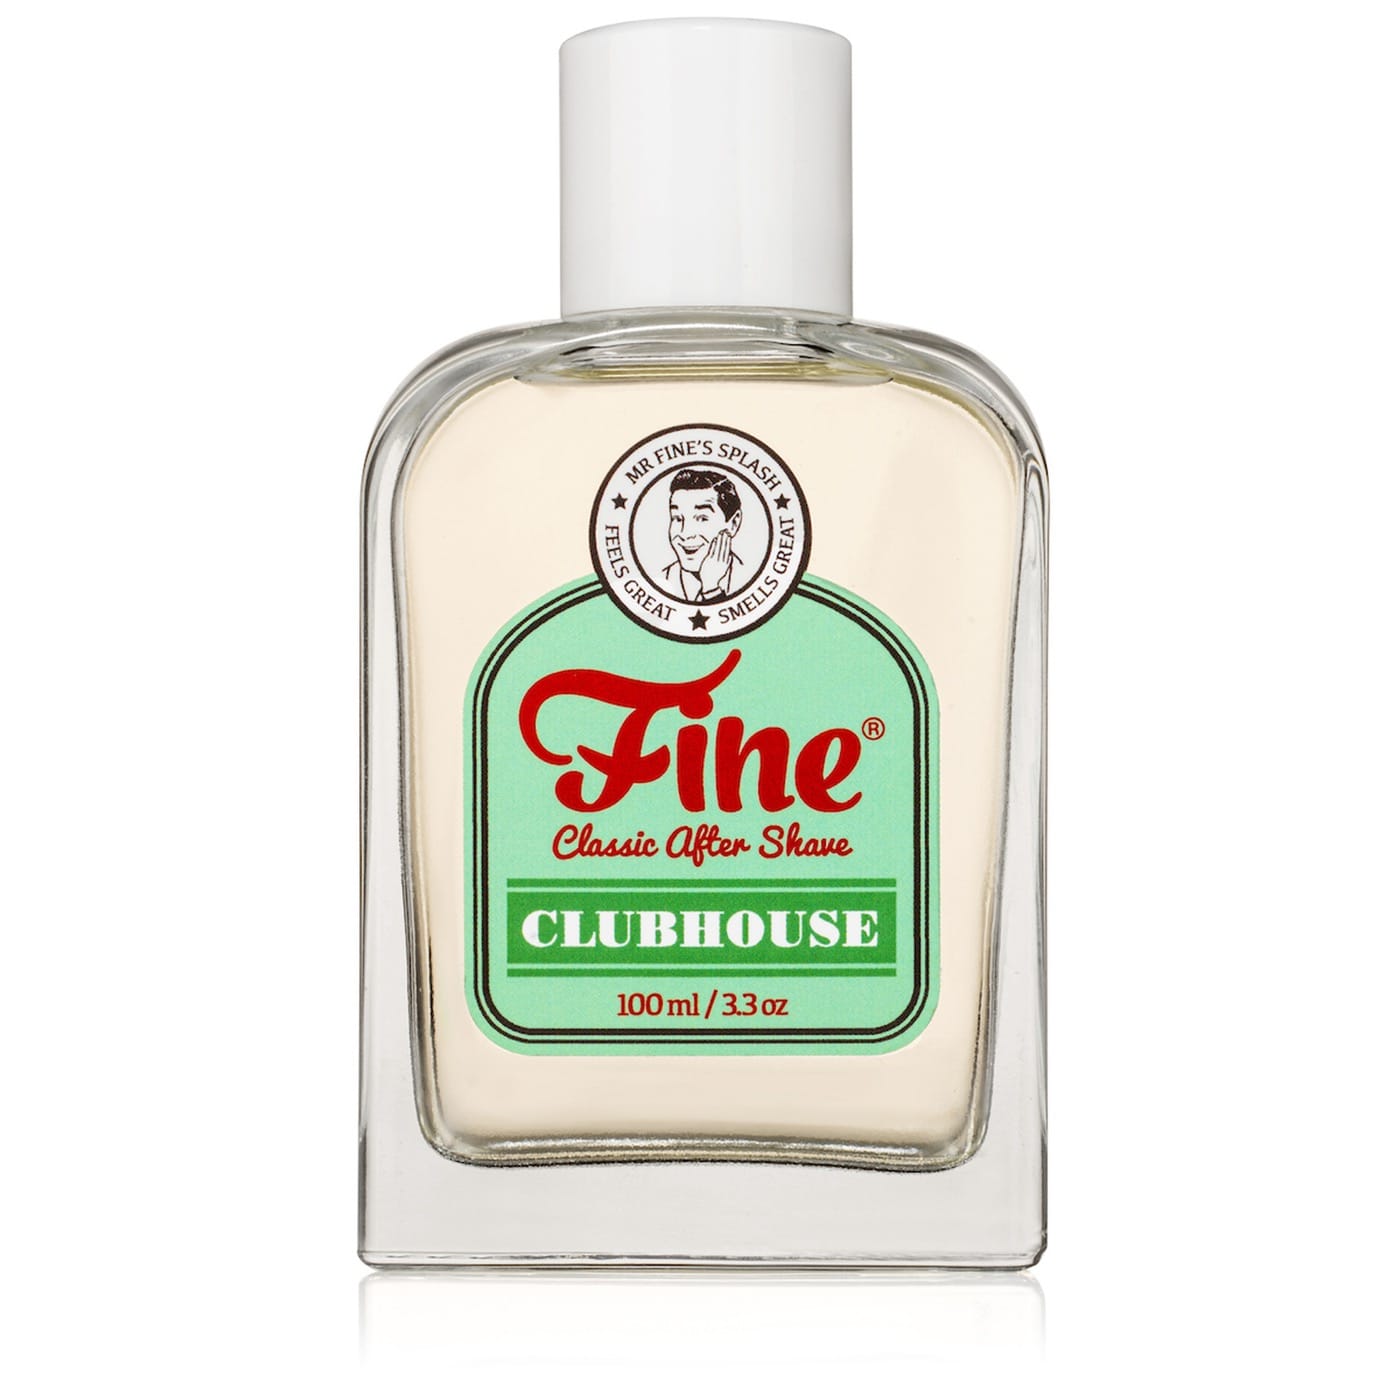 Fine Classic After Shave Clubhouse 100ml - 1.2 - FA-